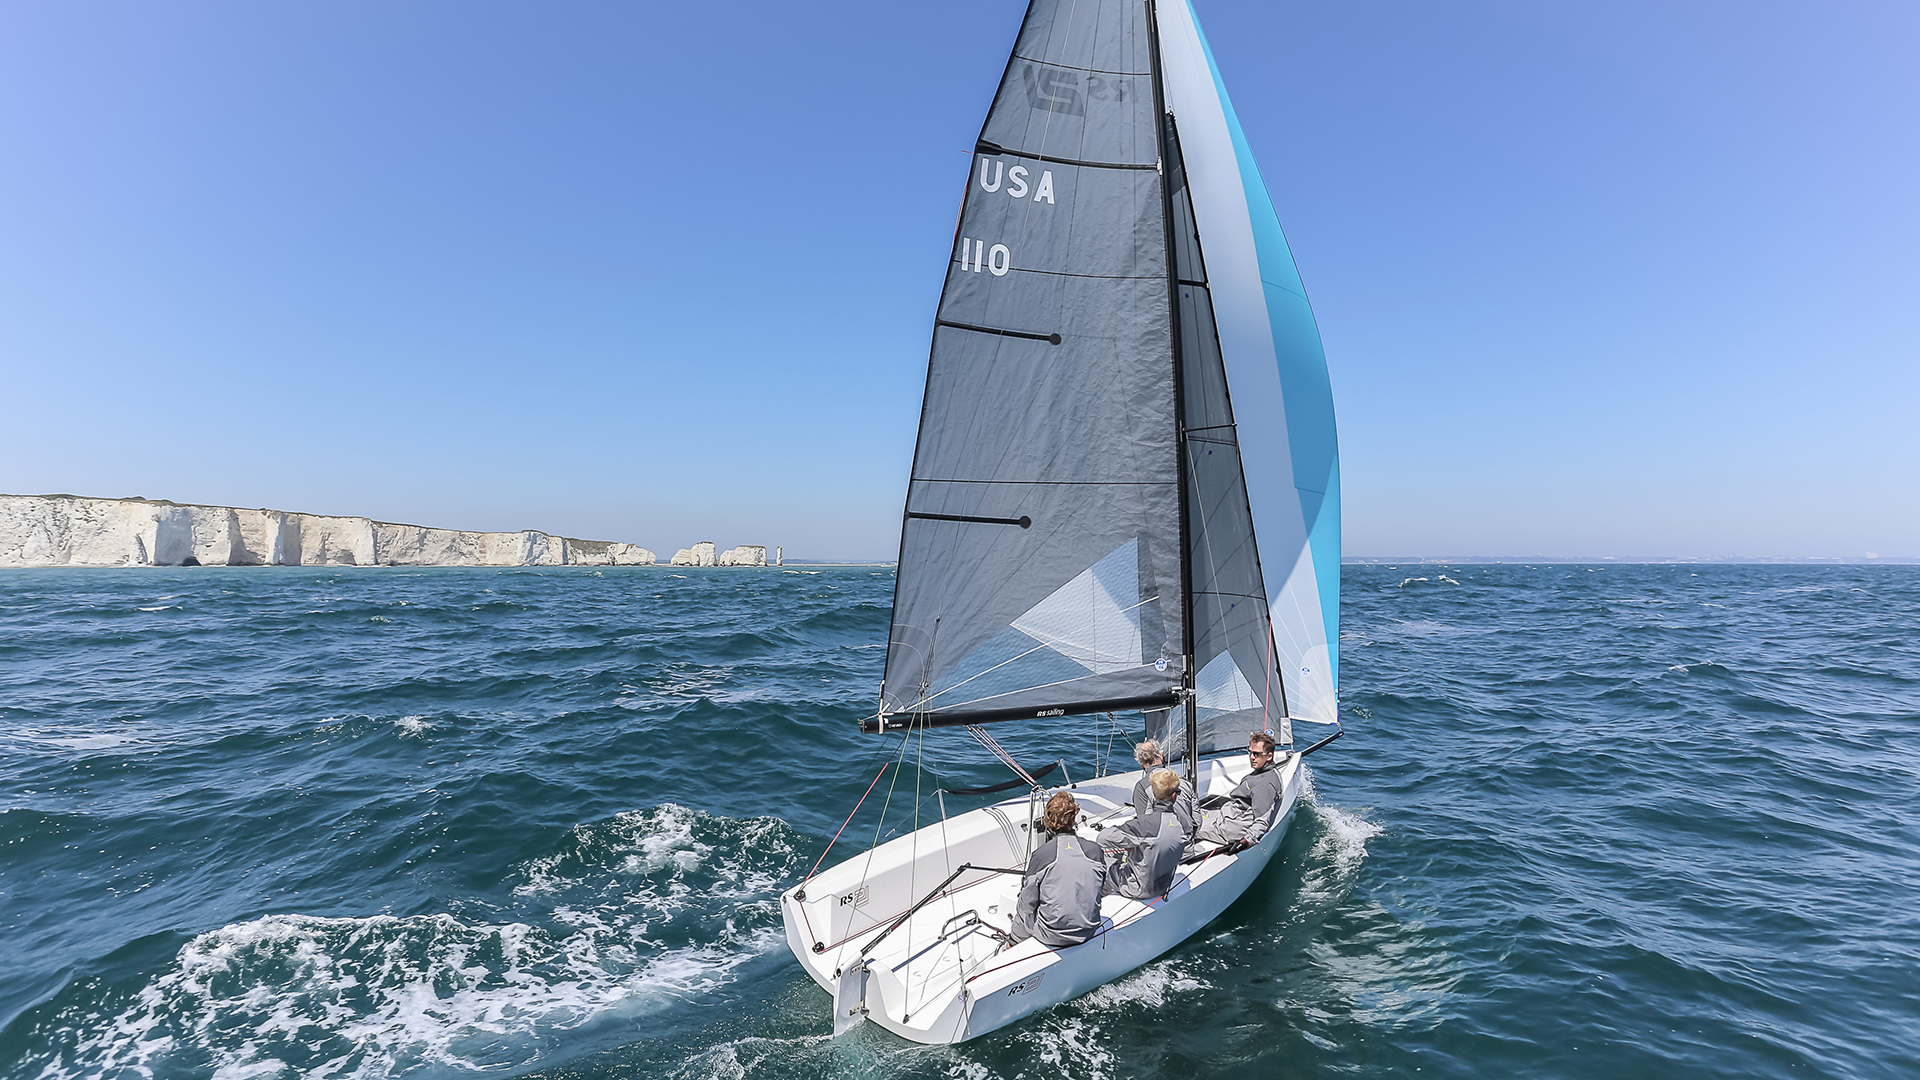 Easy Steps to Make Your Sailing Trip Safer